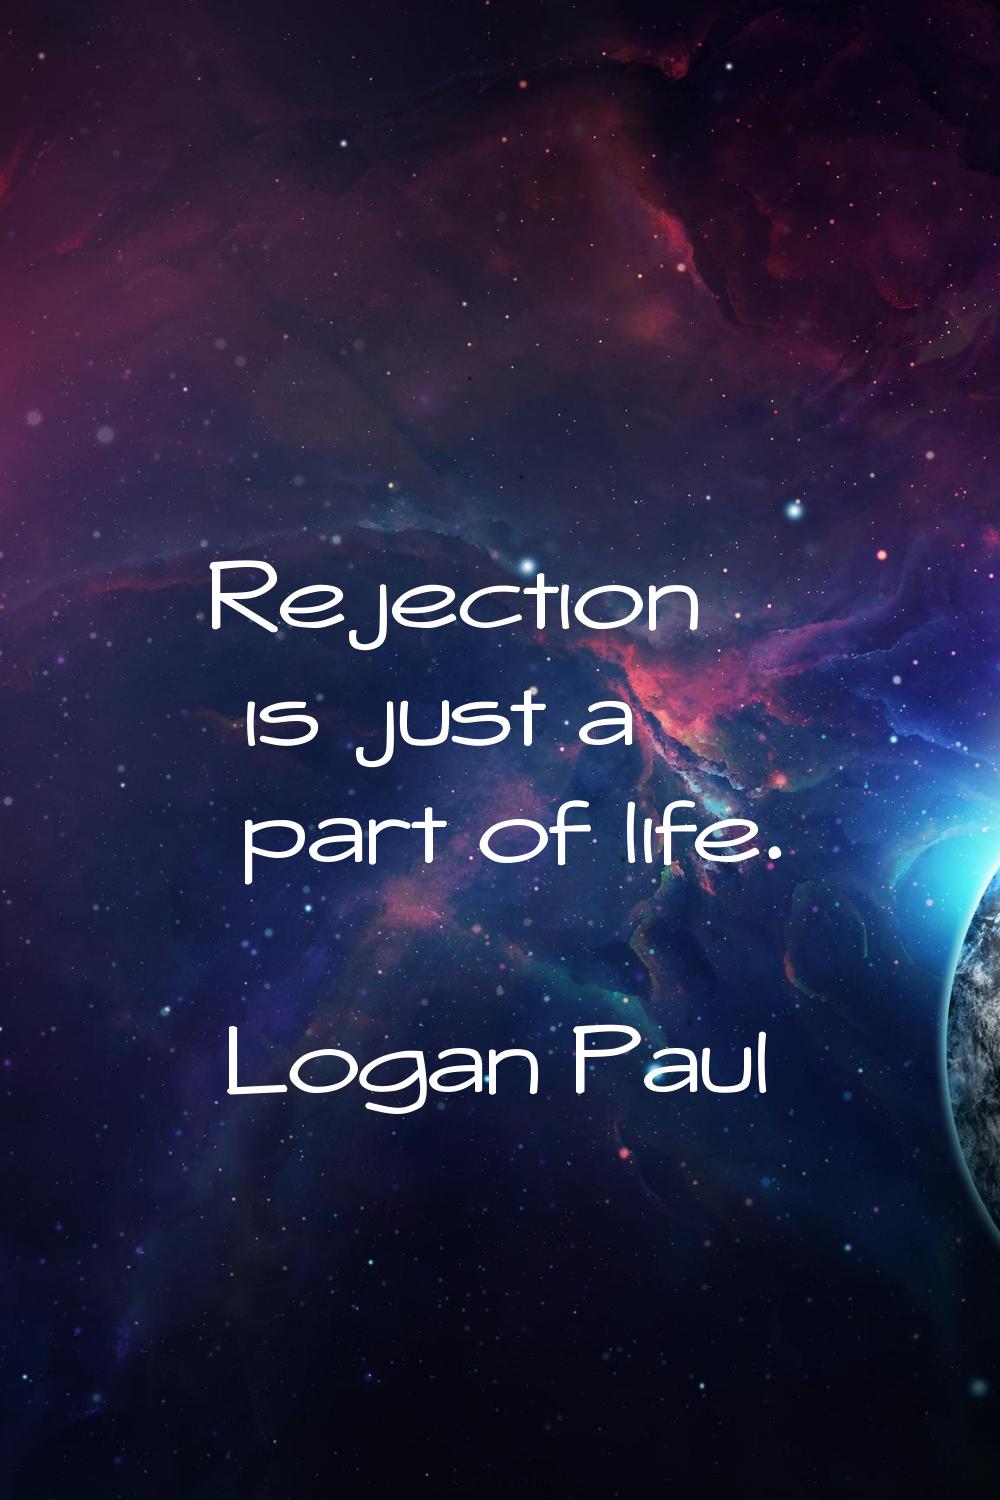 Rejection is just a part of life.